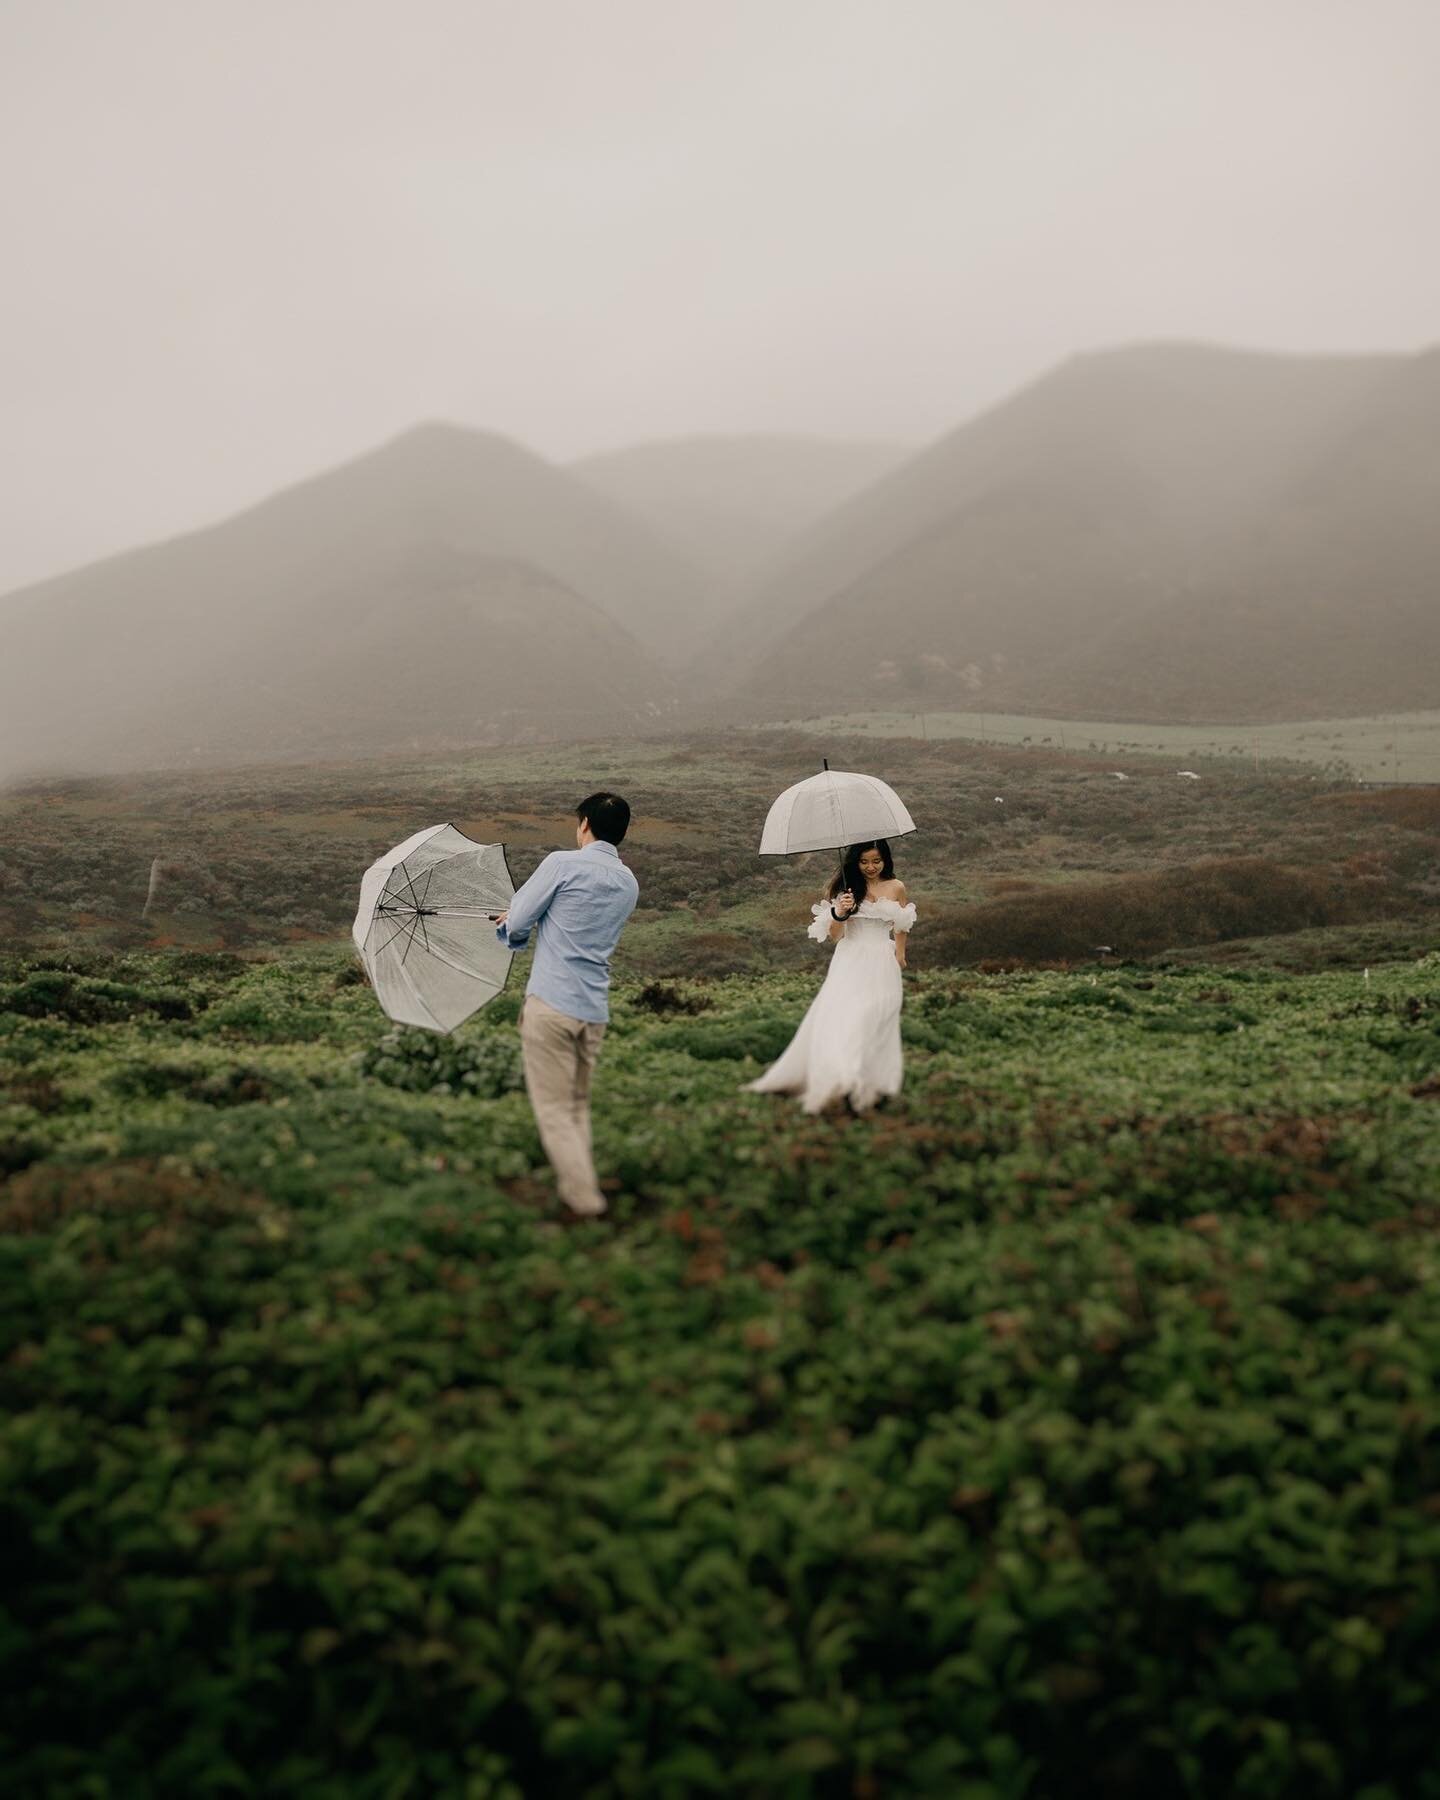 Never been more thankful for clients that embrace their day and a husband who throws a rain jacket in the car when I didn&rsquo;t think I needed one. 

 #wildelopements #californiaweddingphotographer #sthelenawedding #sthelenaweddingphotographer #nap